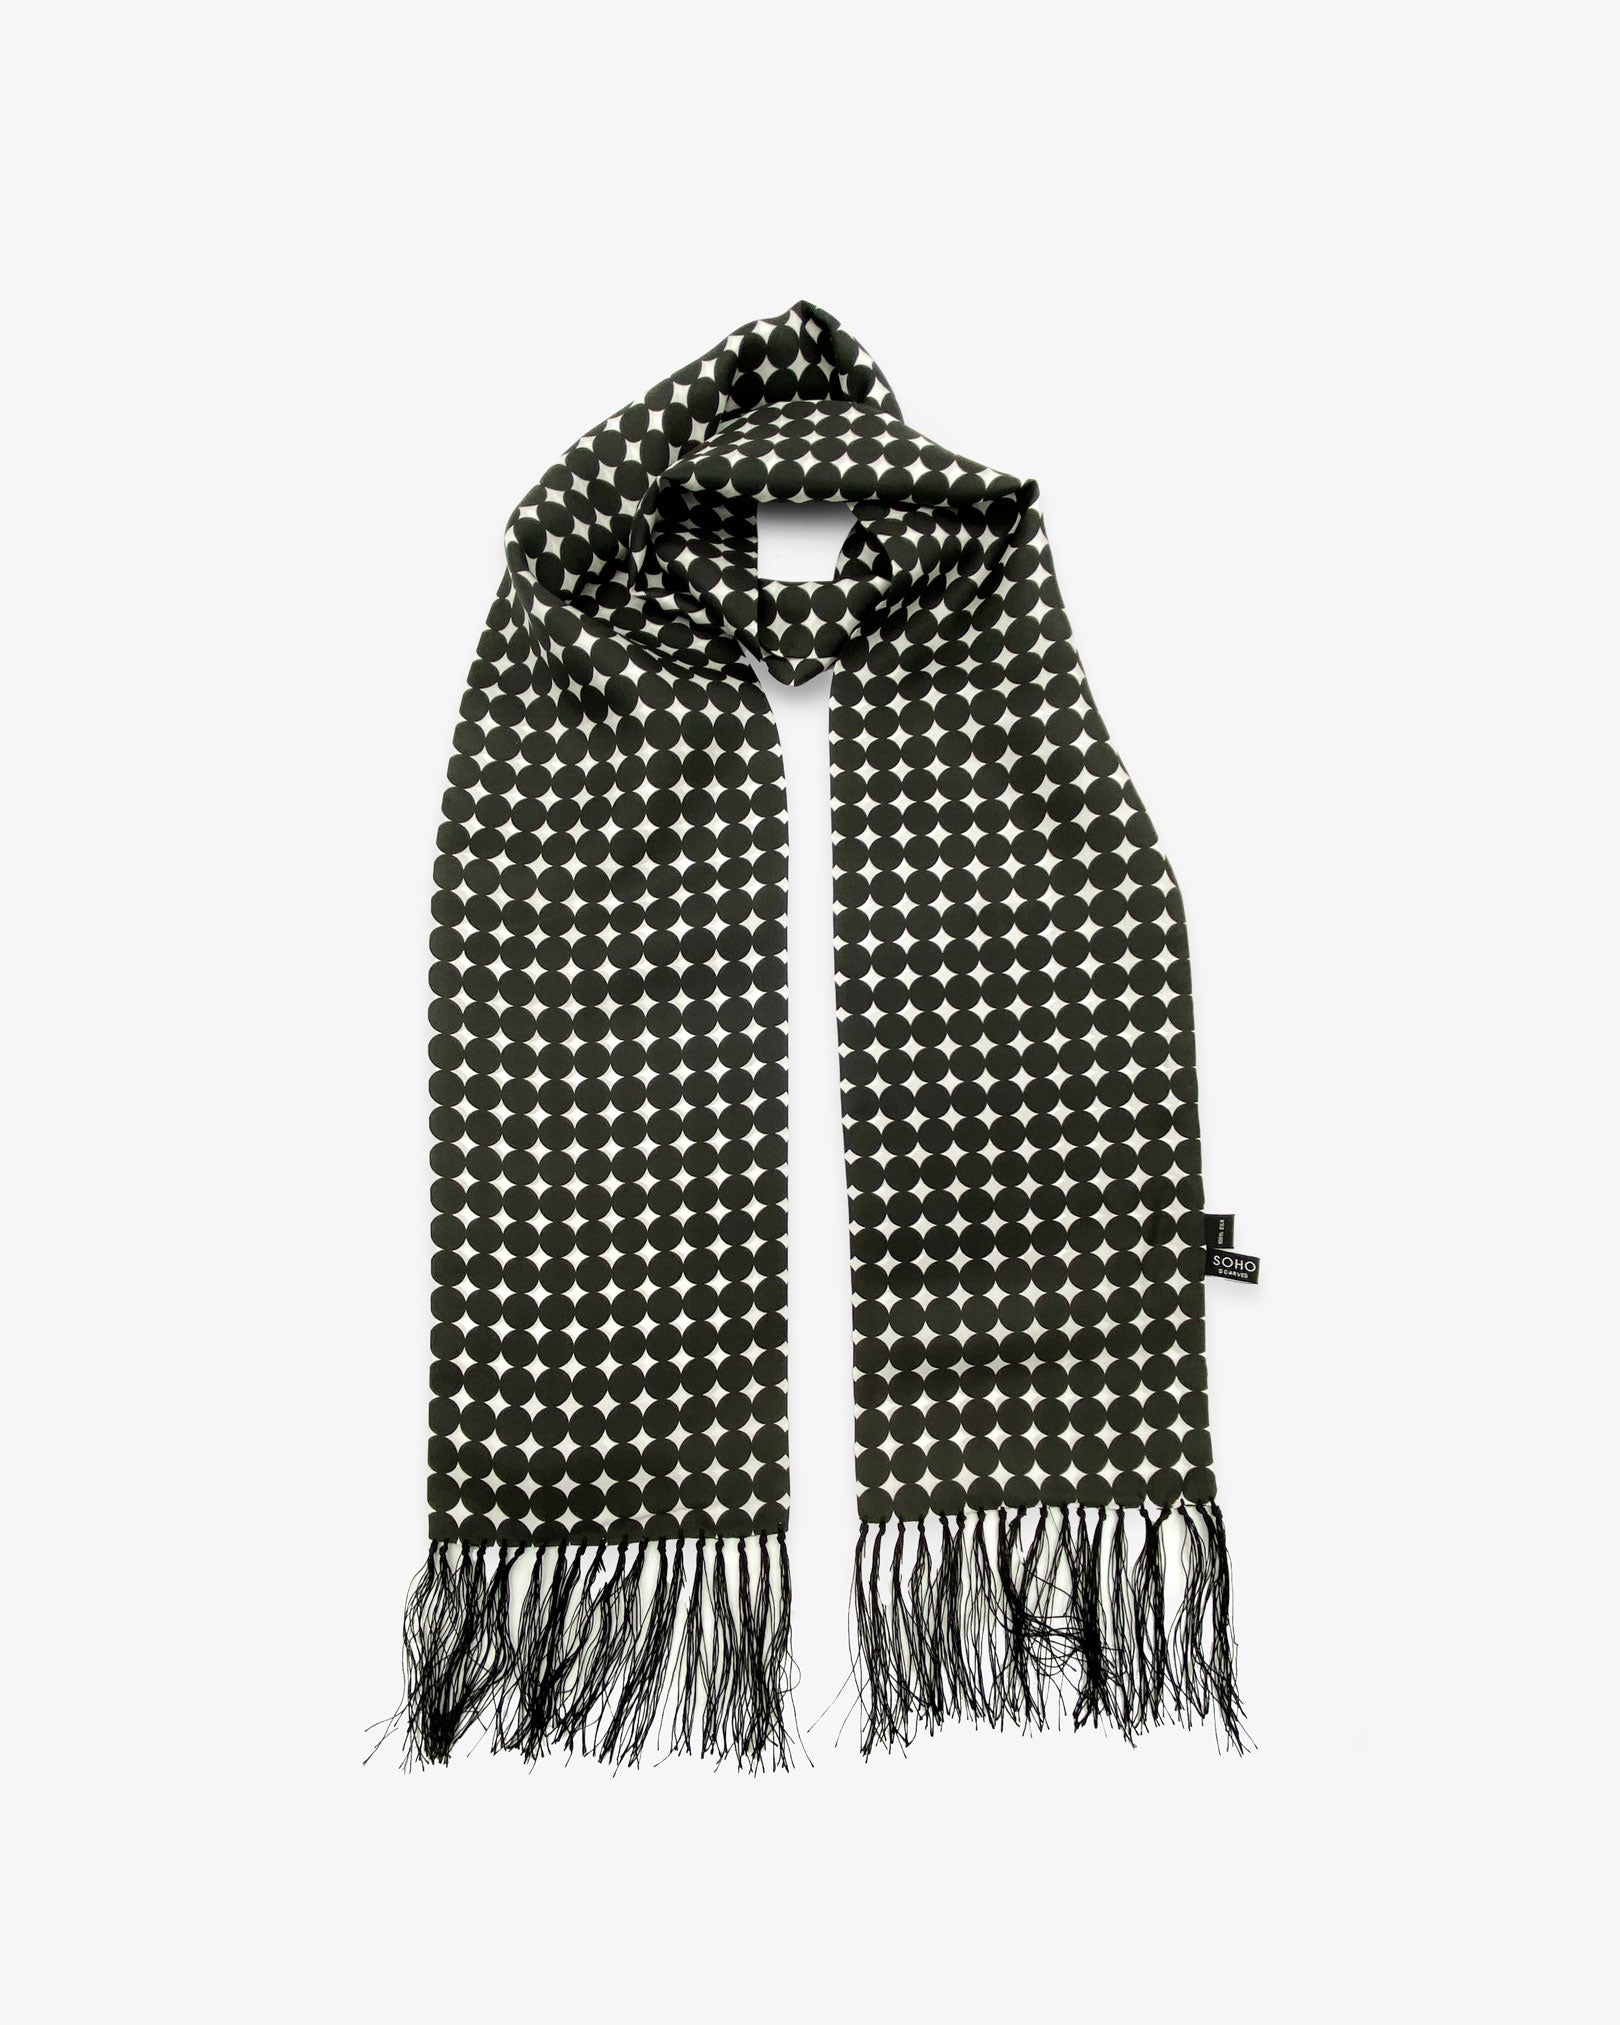 The Grant silk aviator scarf looped with both ends parallel to effectively display the black fringe and full repeat pattern of black discs on a white background.